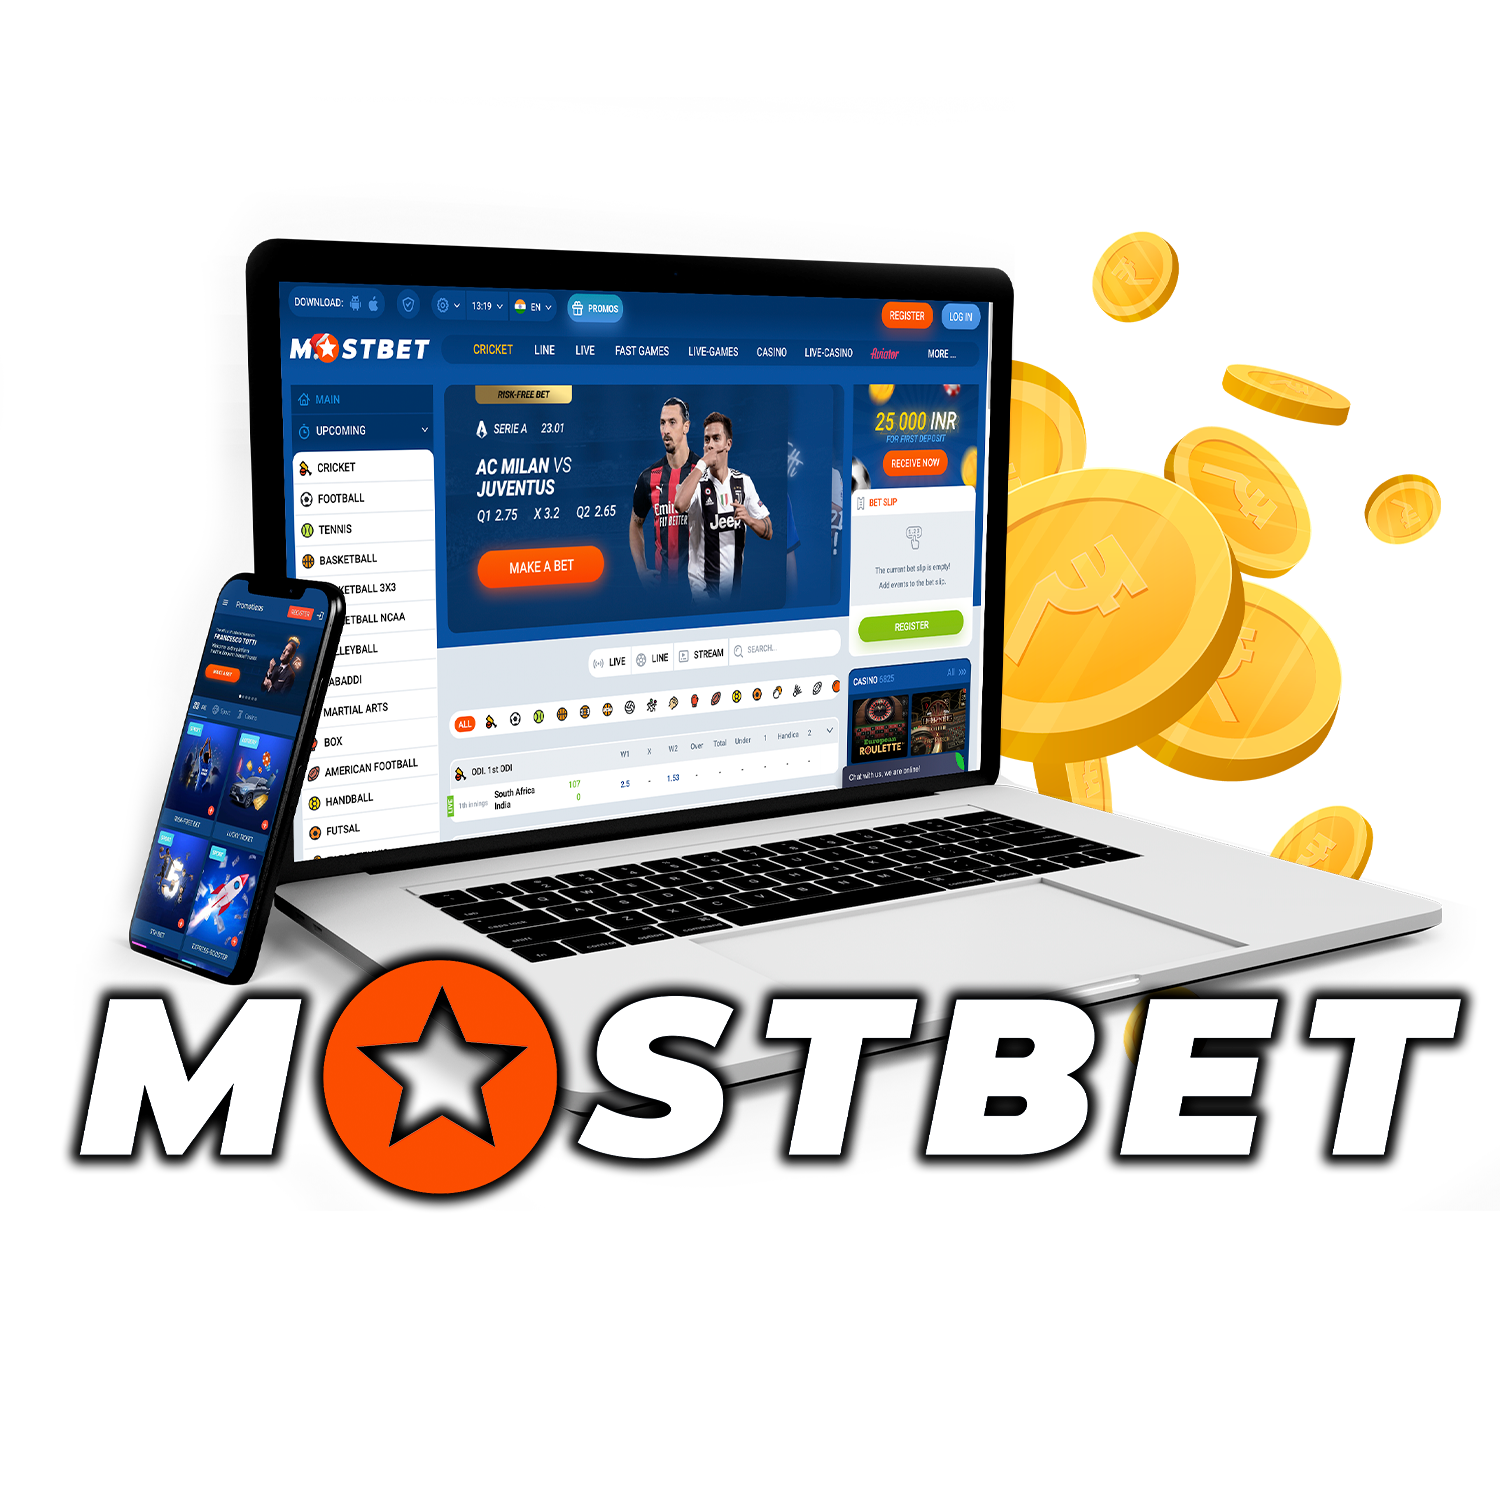 25 Questions You Need To Ask About Mostbet - Your Ultimate Betting Platform in Vietnam